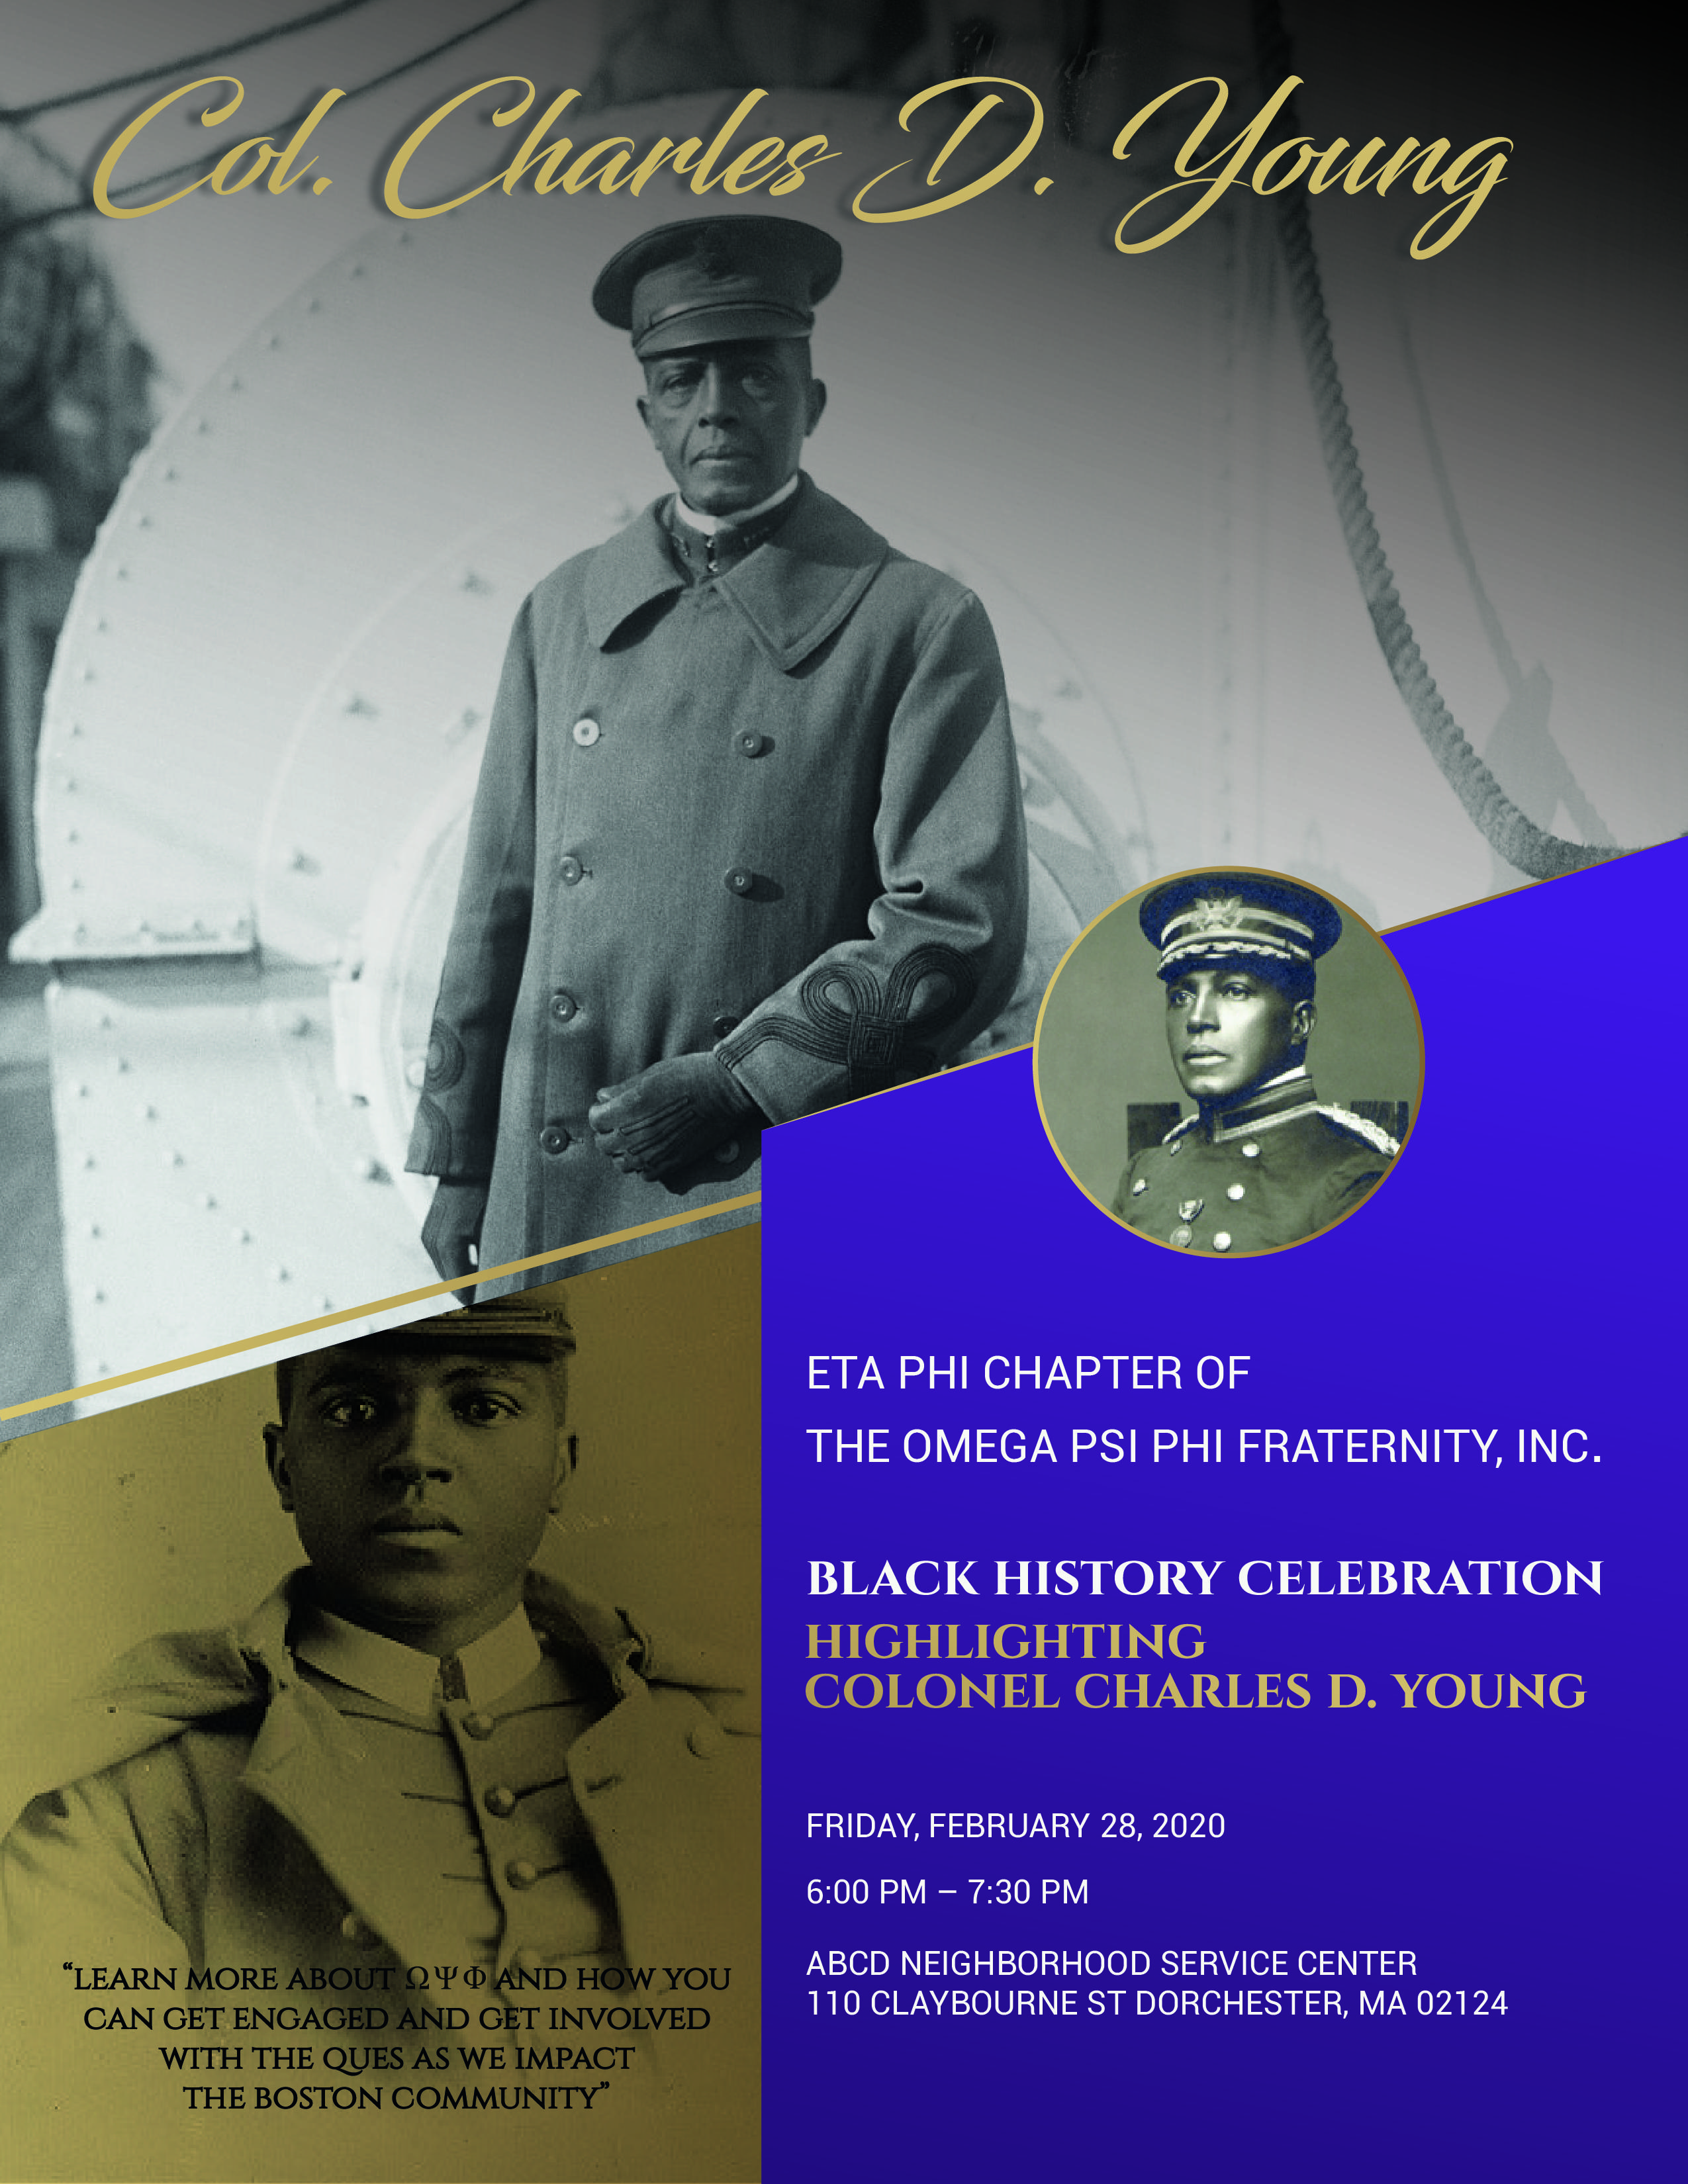 Black History Celebration - Highlighting Colonel Charles D. Young